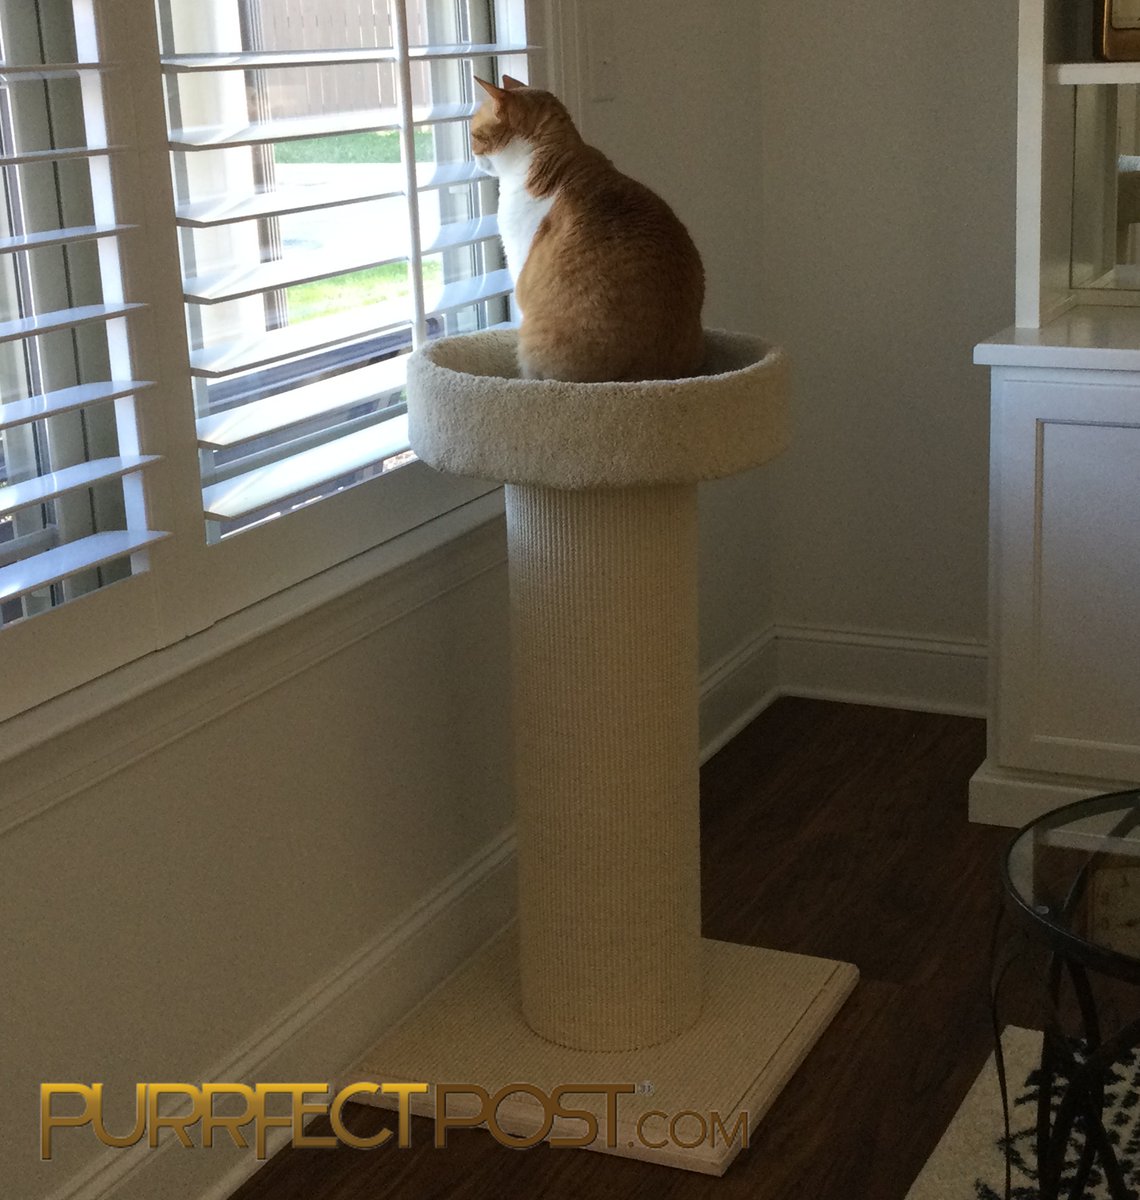 ★★★★★
Tiger loves his Mondo with the shorter post. He’s older and it’s much easier for him to jump onto it.
CAROL S
See more at Mondo Replacement Post bit.ly/3GUOVLR 
AND
Mondo Deluxe bit.ly/3LbLOlt 

#purrfectpost #cats #bestscratchingpost #oldercats